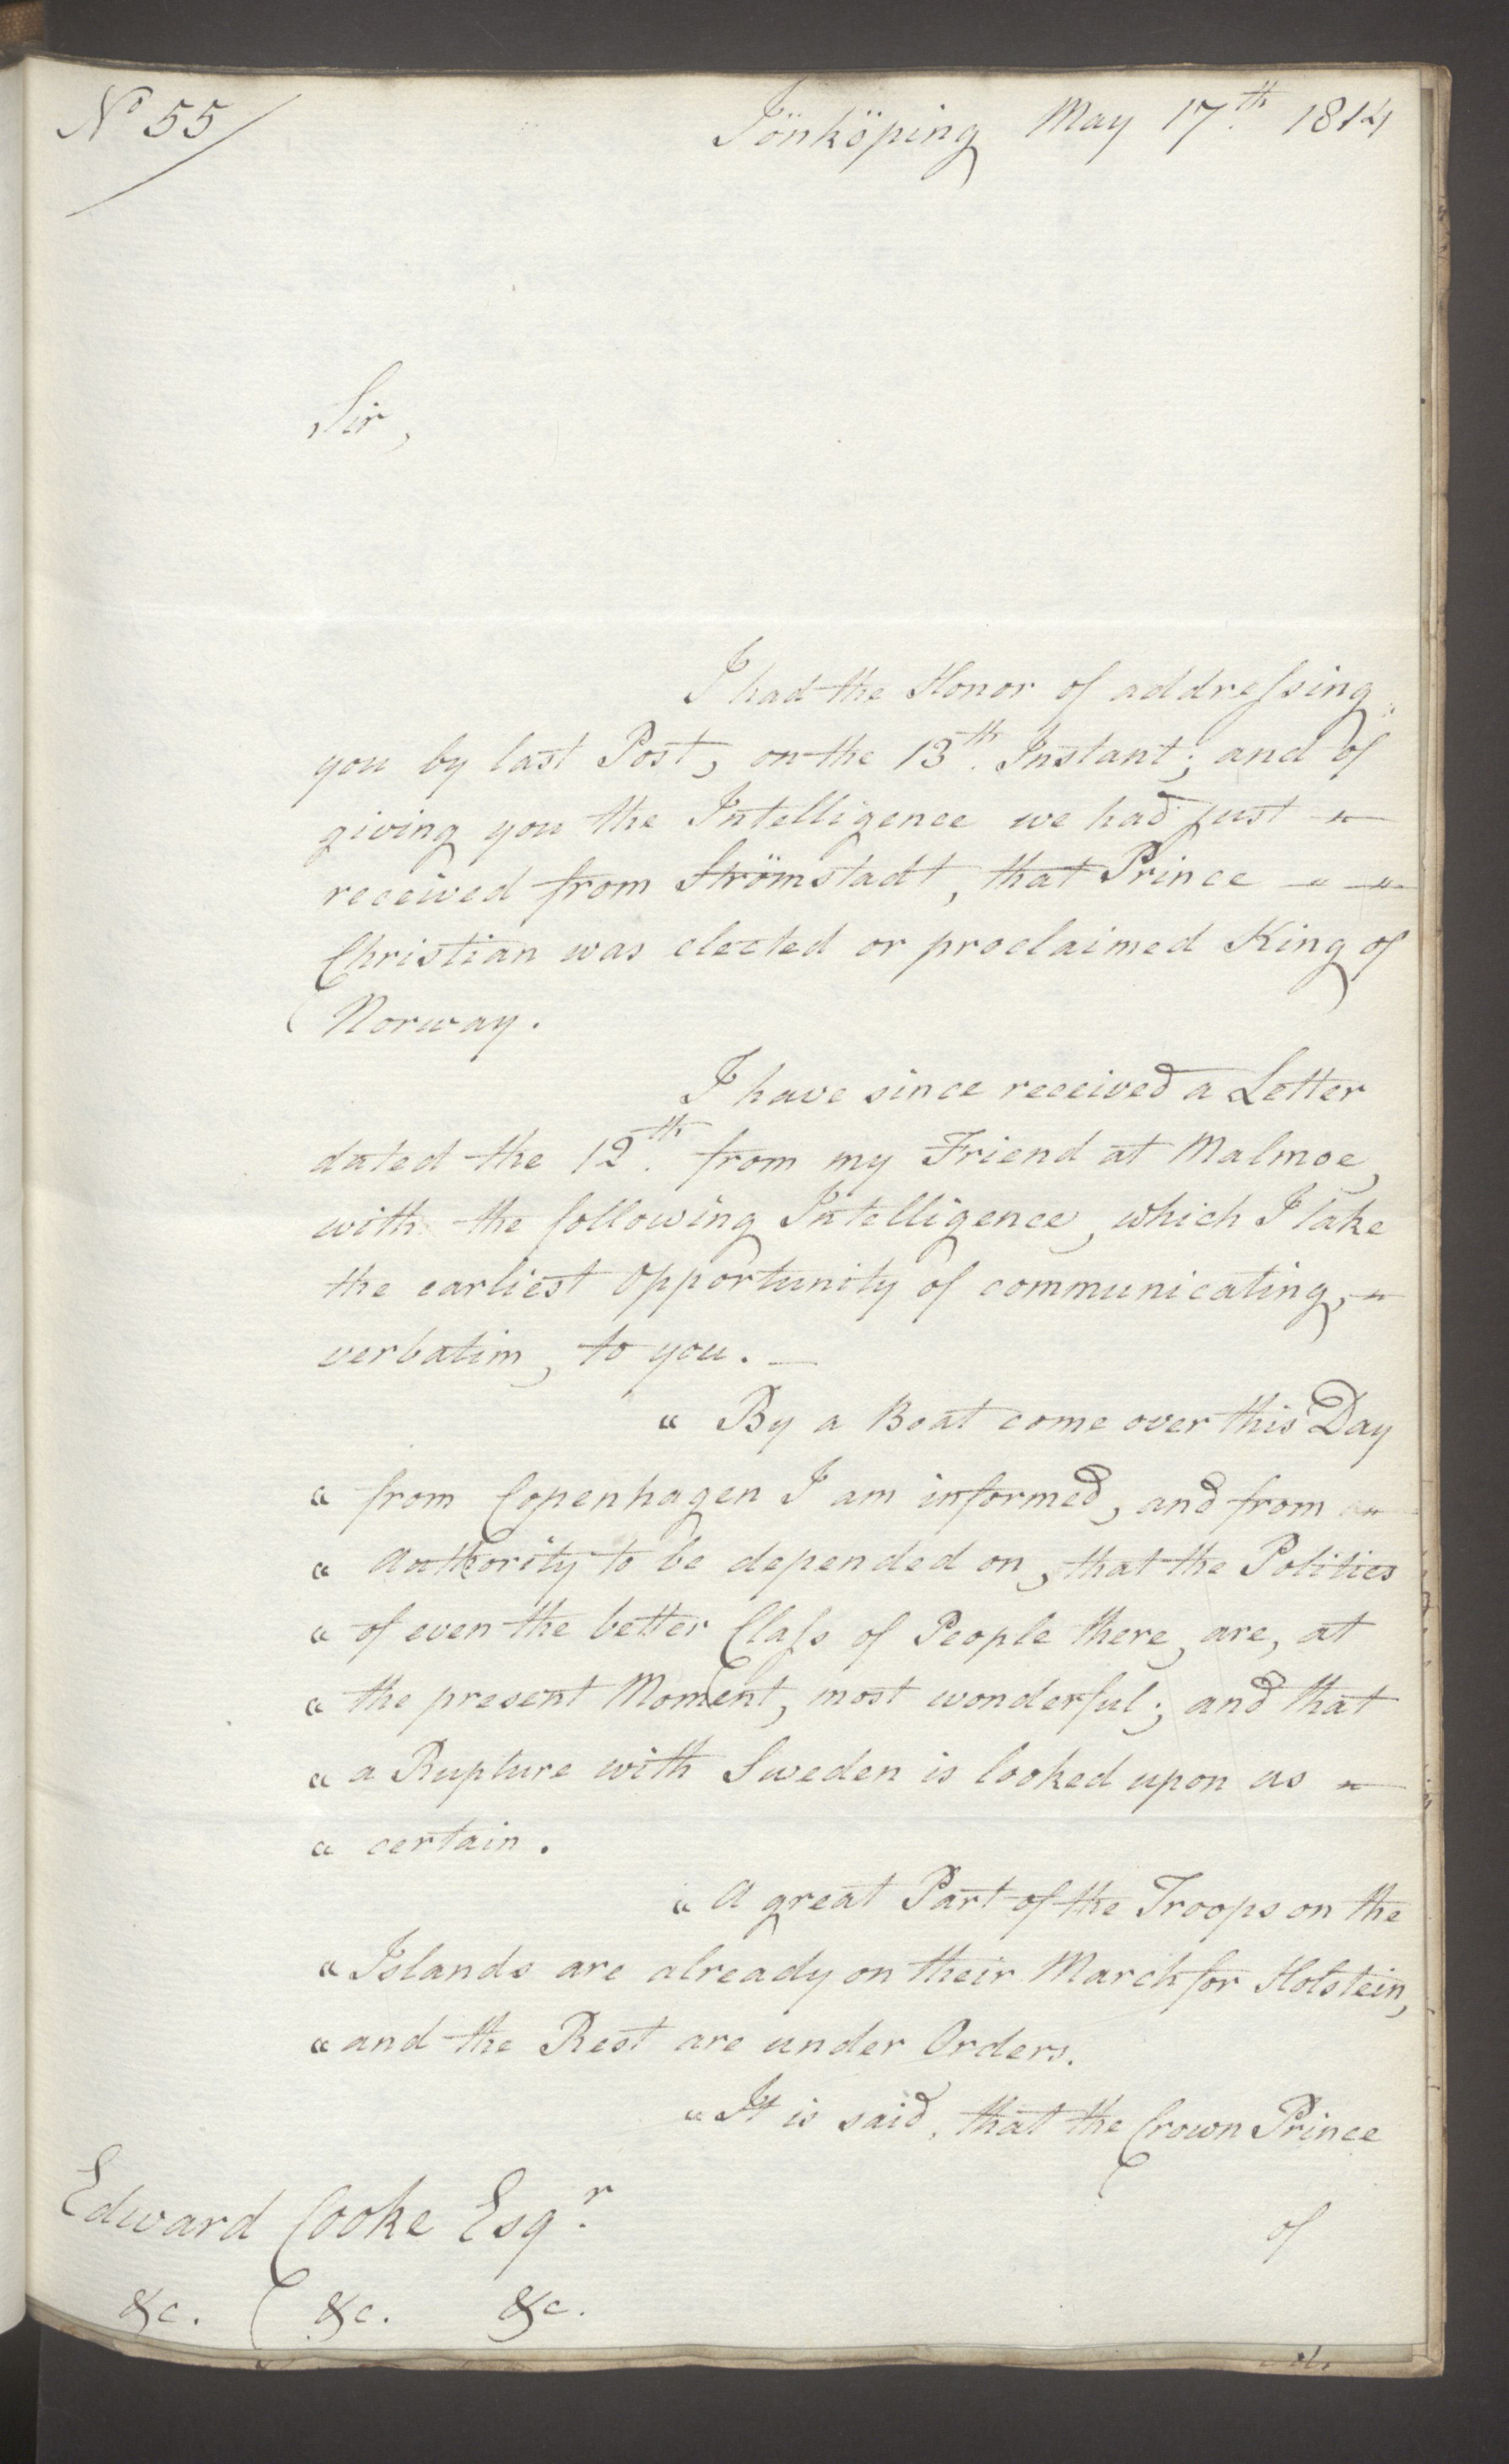 Foreign Office*, UKA/-/FO 38/16: Sir C. Gordon. Reports from Malmö, Jonkoping, and Helsingborg, 1814, s. 53